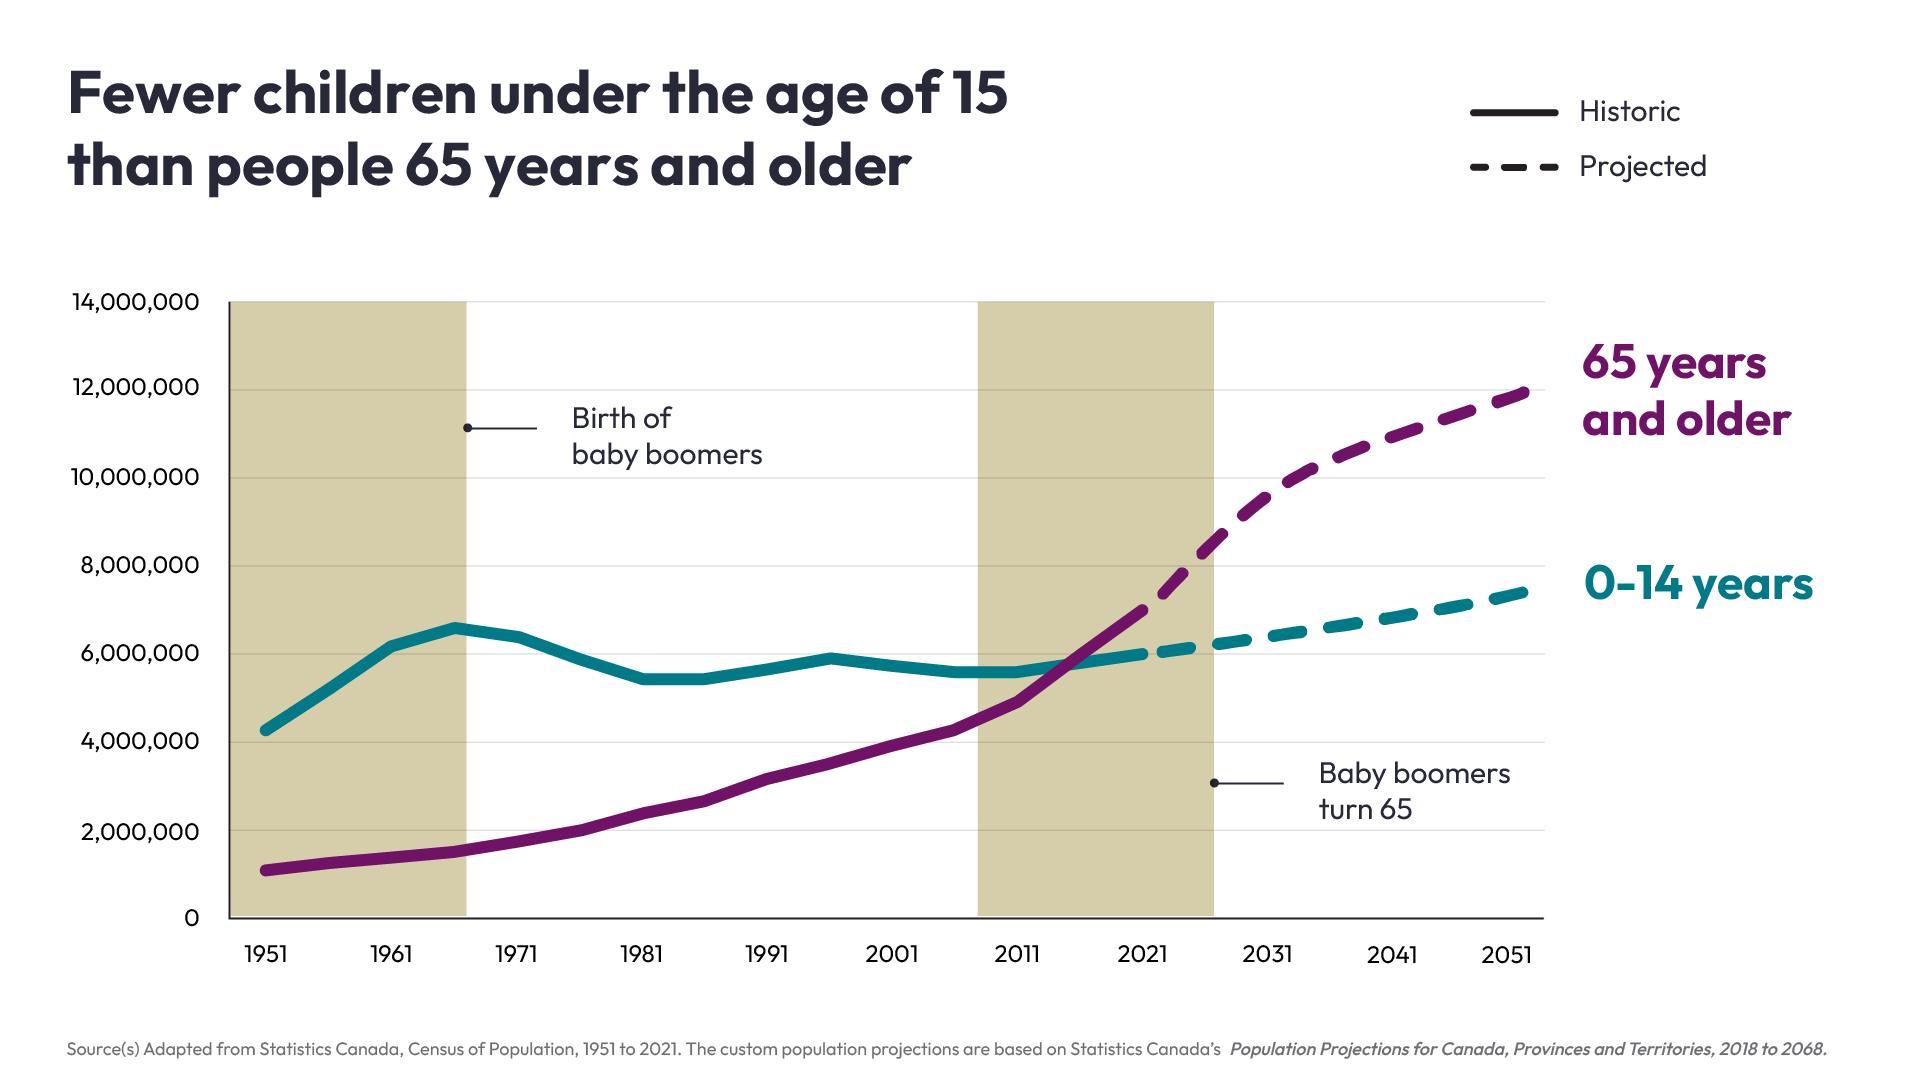 Fewer Children Under the Age of 15 Than People 